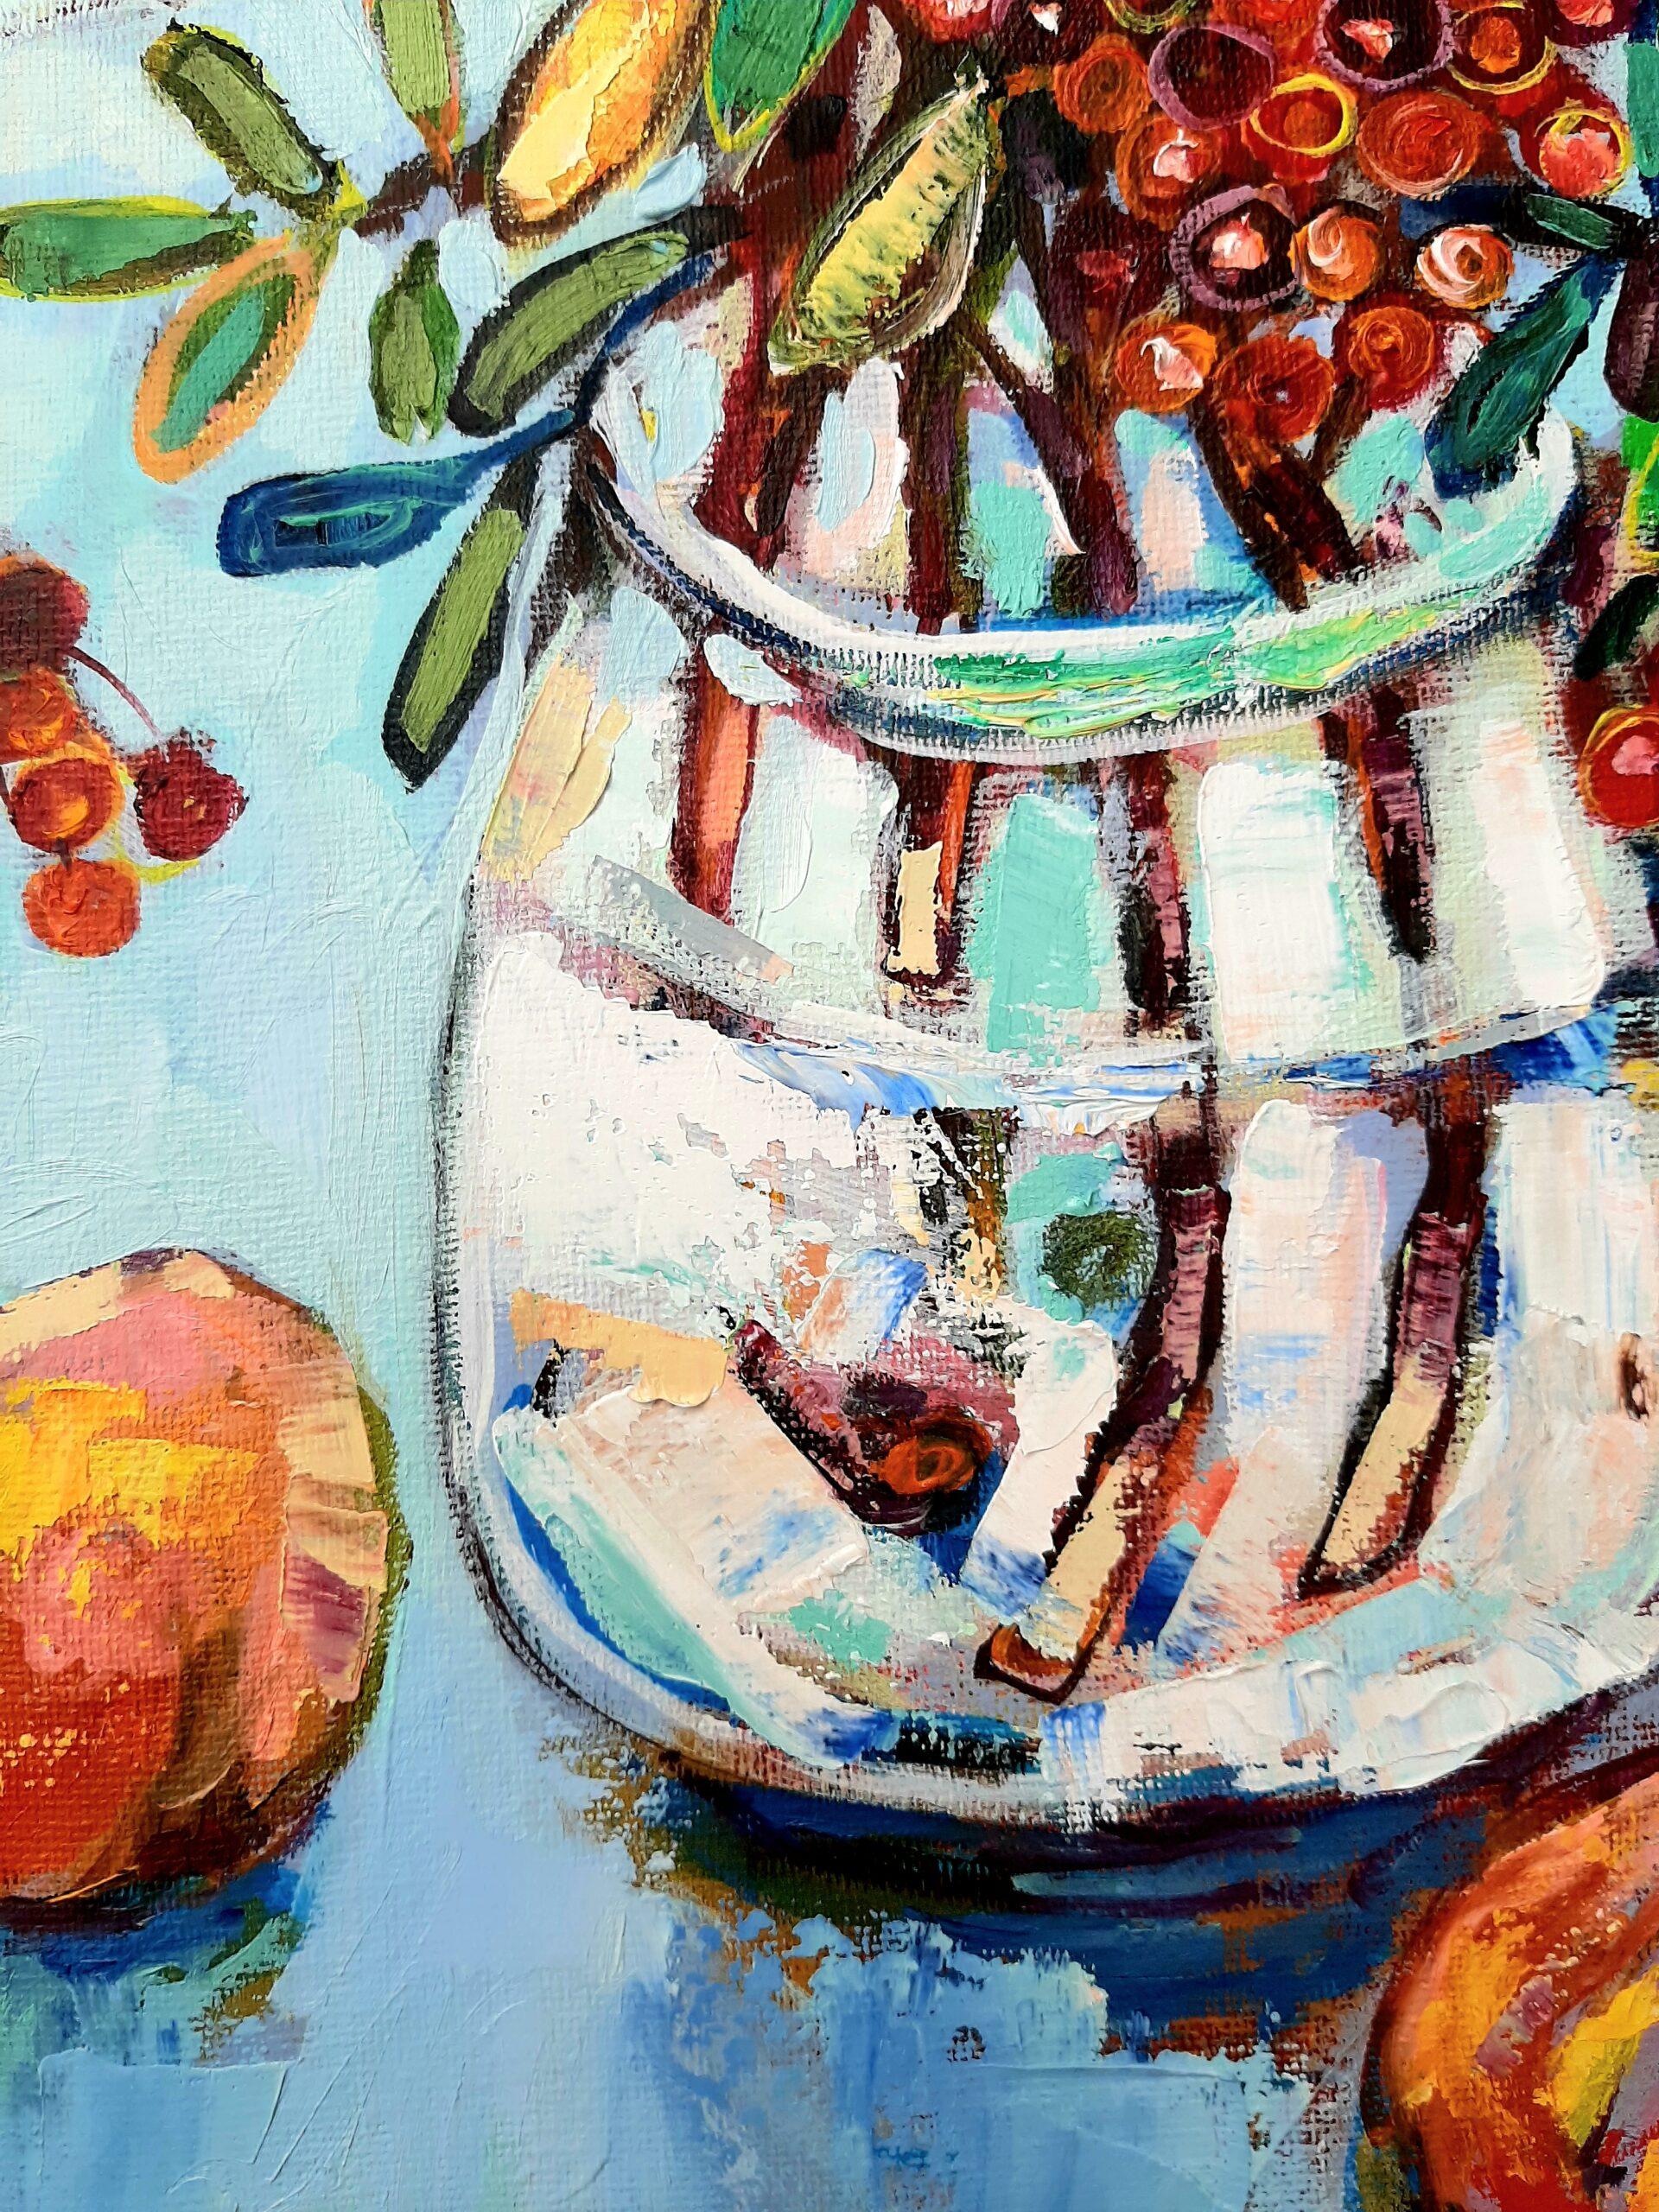 Rowan and Peaches -contemporary still-life colourful table oil painting - Contemporary Painting by Ania Pieniazek